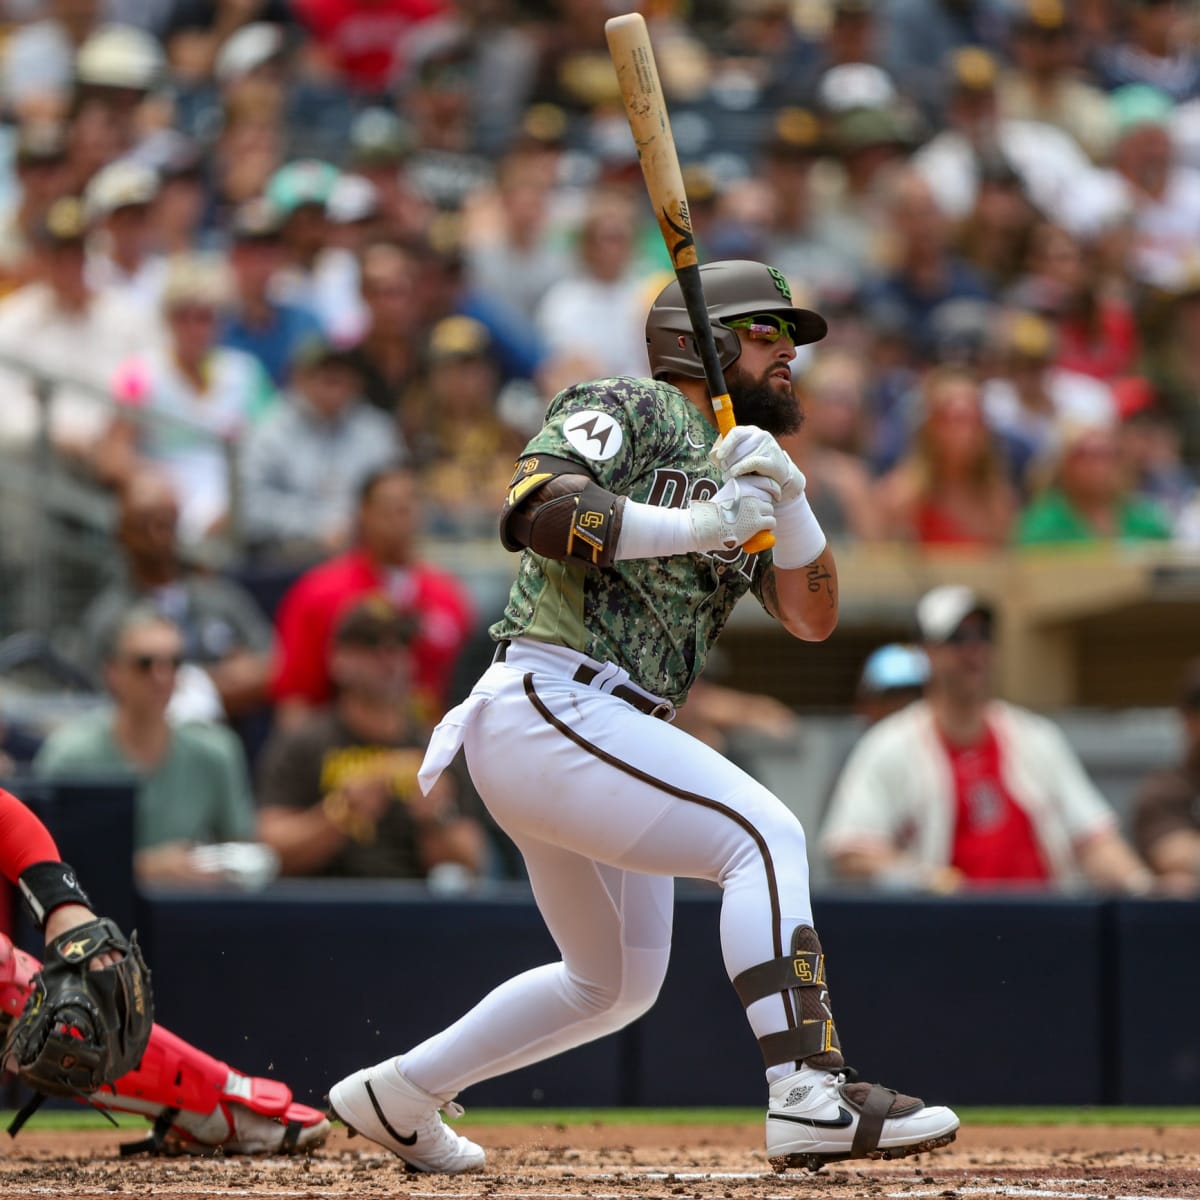 What Could Rougned Odor's Role Be with the Padres?